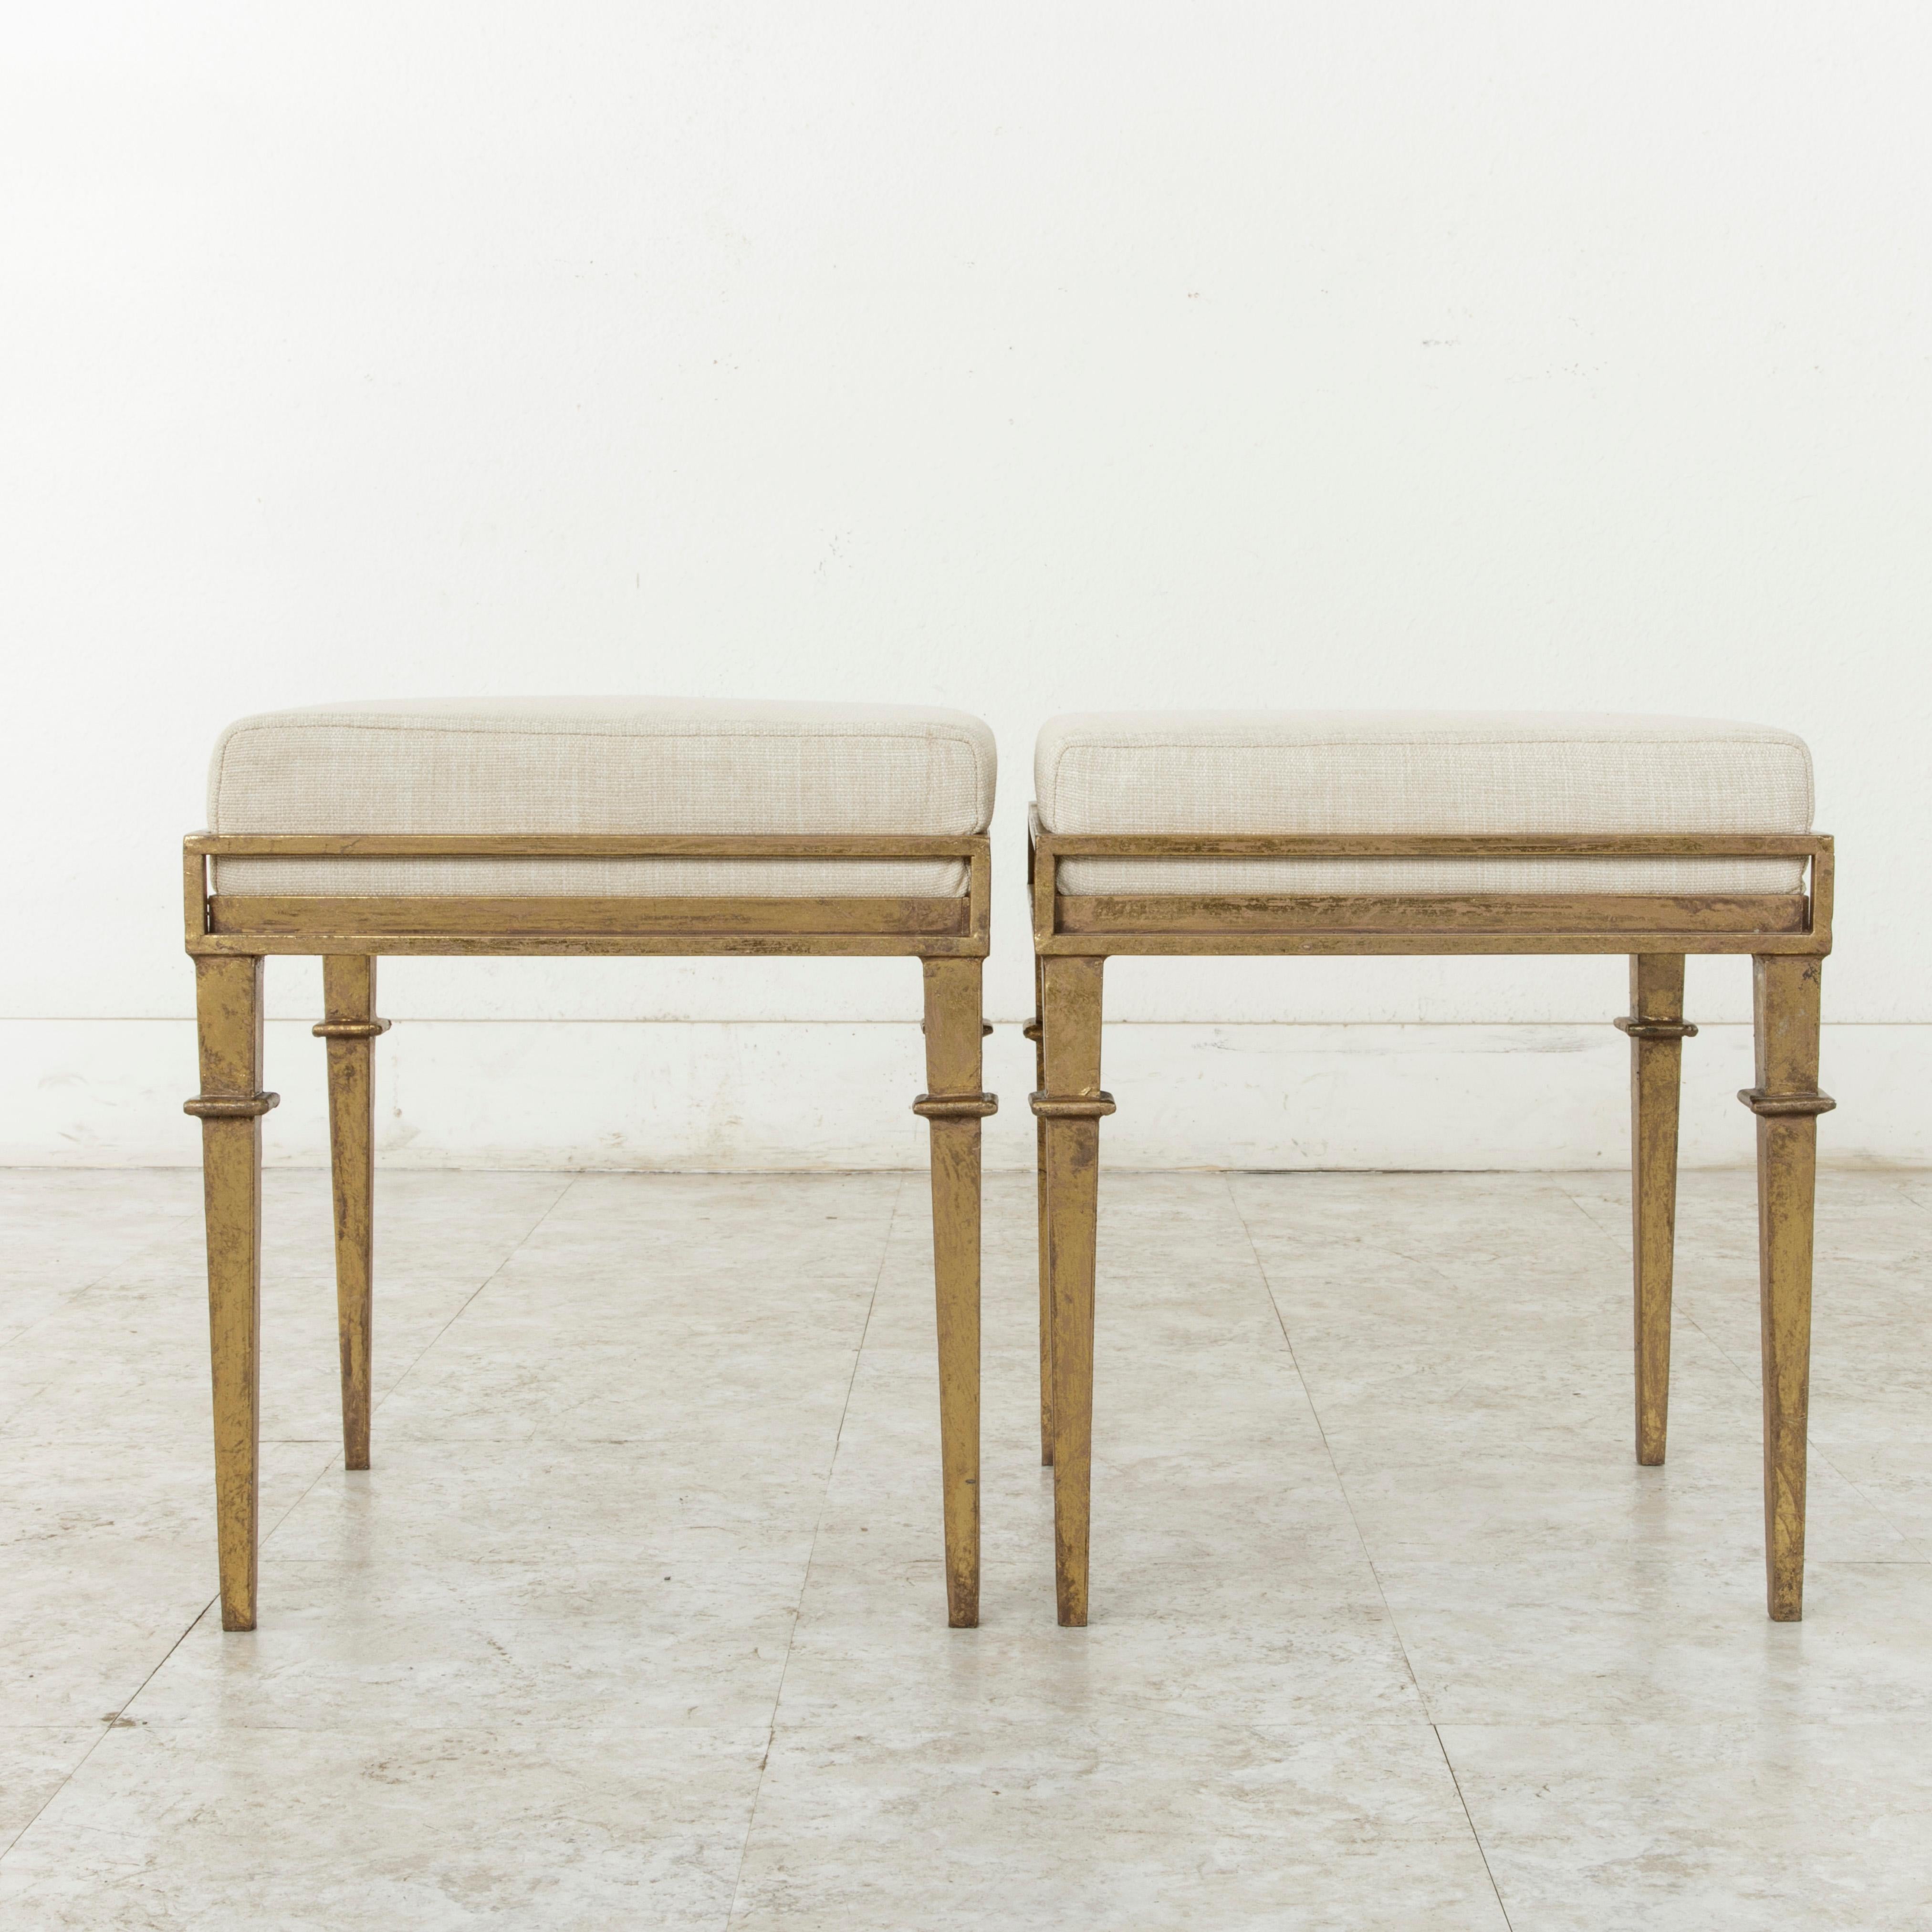 Mid-Century Modern Pair of French Gilded Iron Banquettes or Benches with Linen Upholstered Cushions